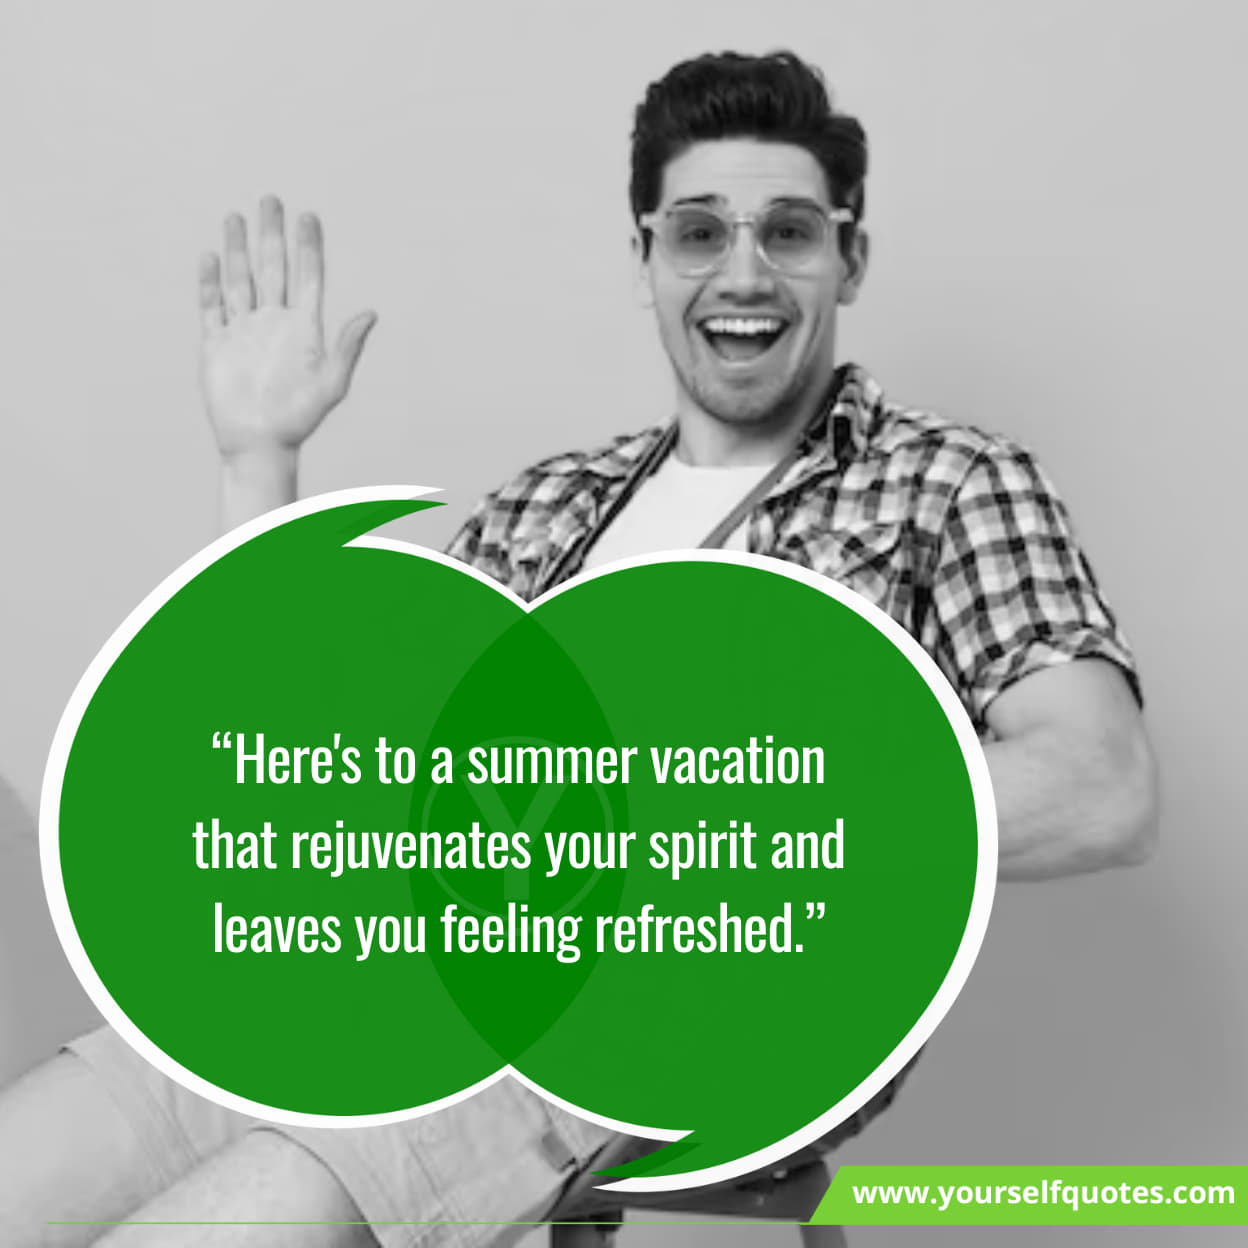 Inspirational quotes for summer vacation